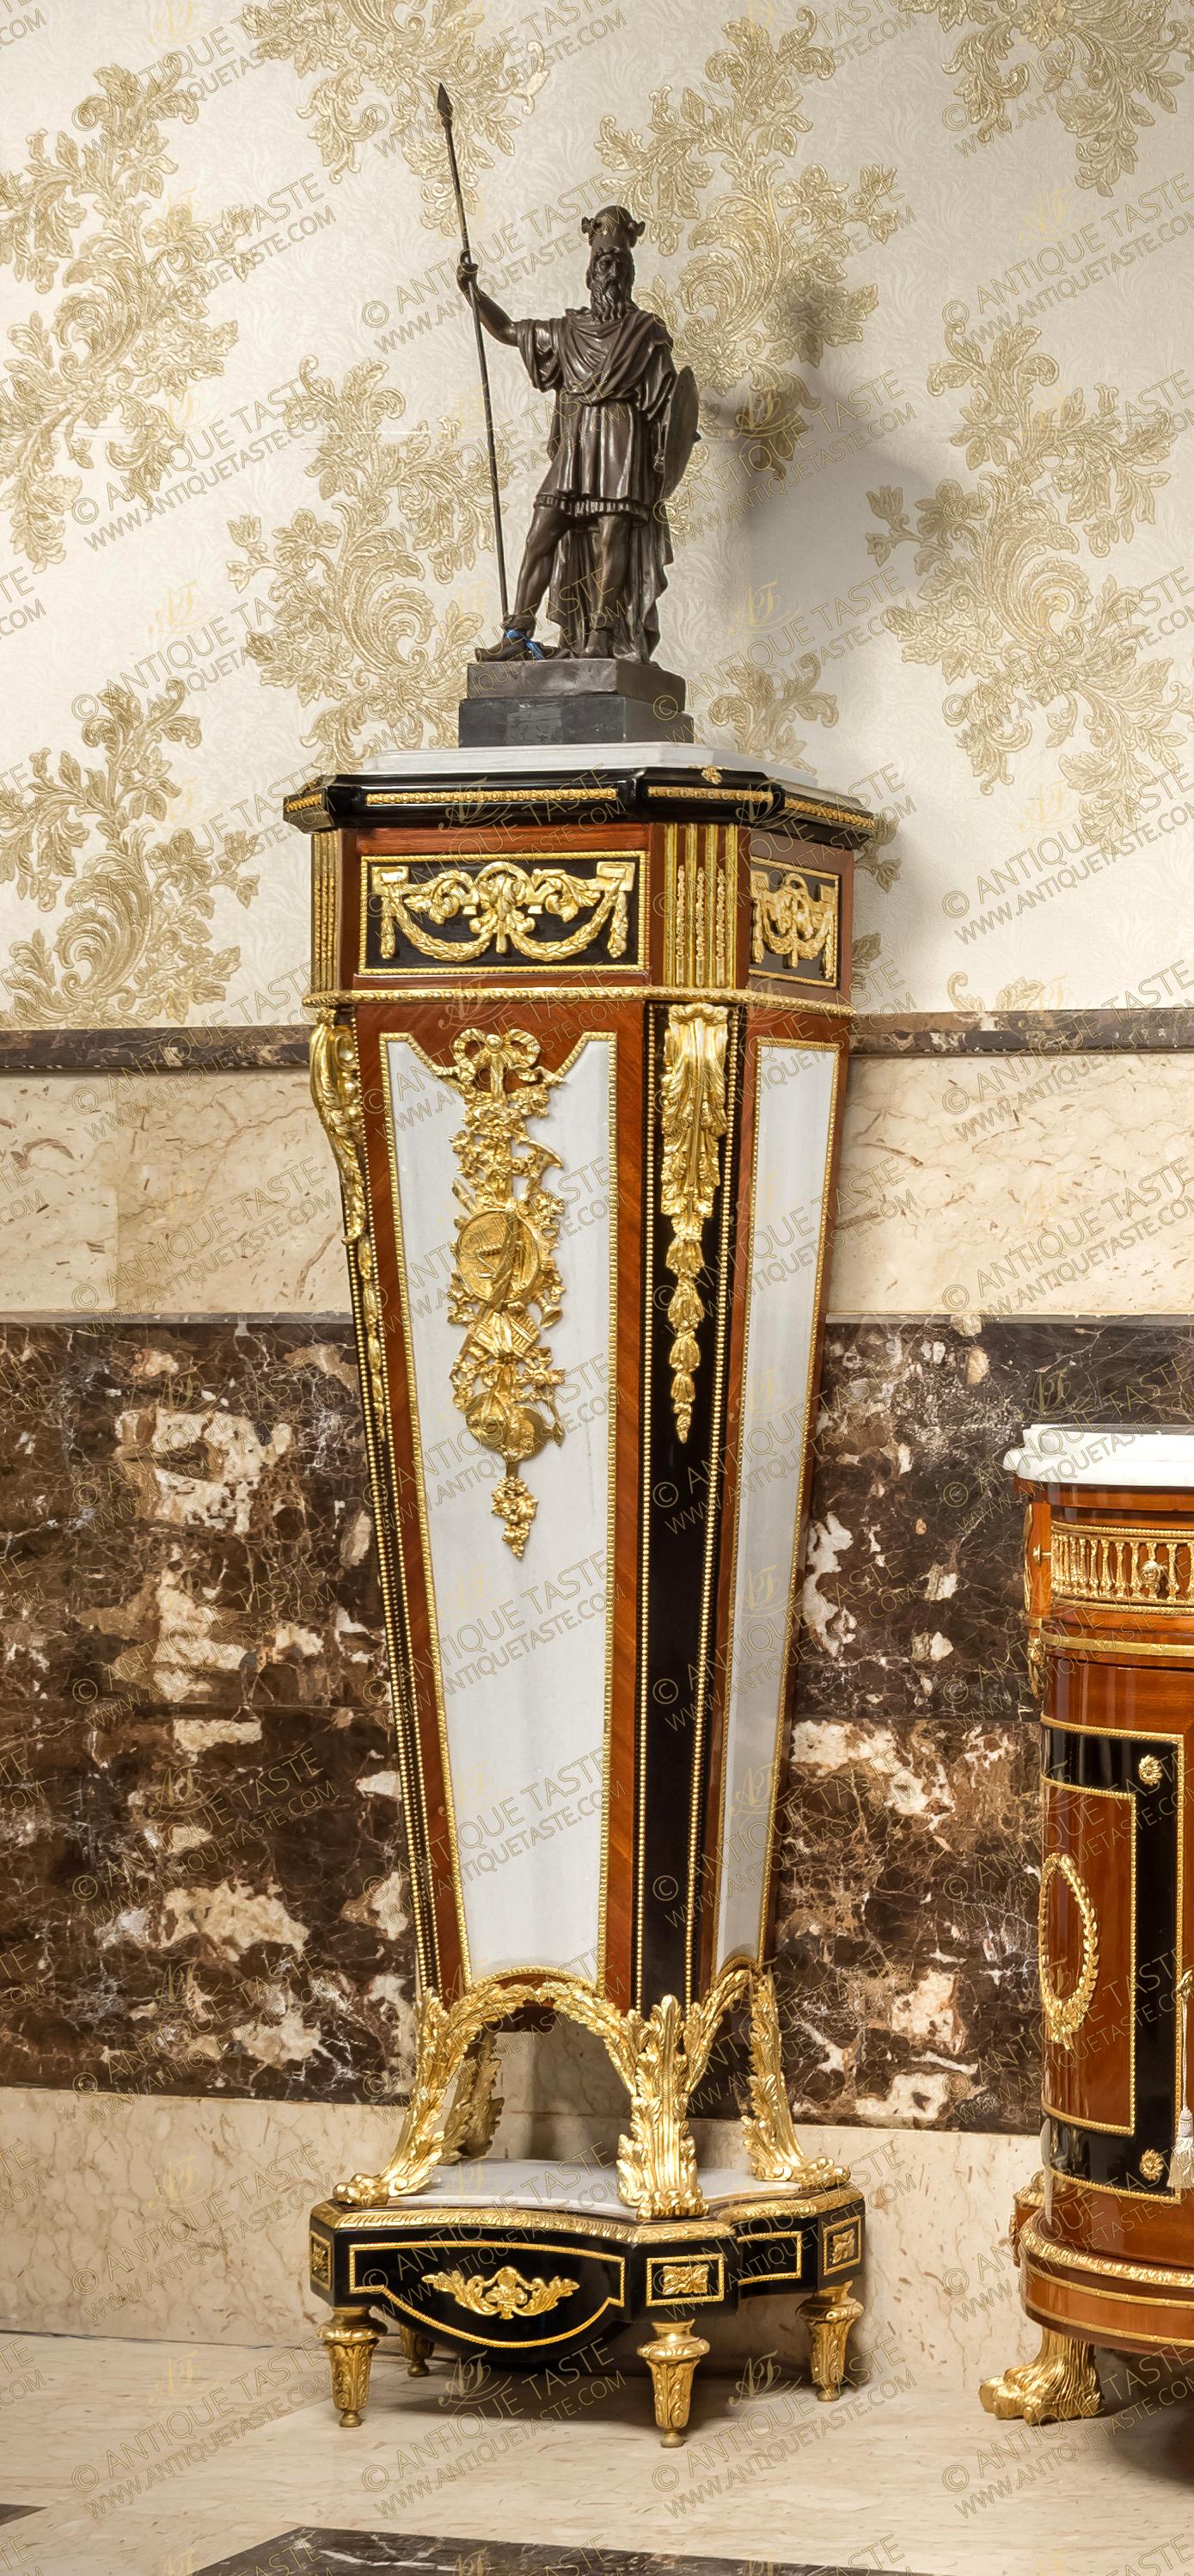 A royal and most prestigious pair of French late 18th century Louis XVI style gilt-ormolu-mounted, ebonized, veneer and marble inlaid monumental pedestal stand after the masterpiece model by the master ébéniste Jean-Henri Riesener circa 1785; Surmounted with a leveled canted corners inset marble top within an ebonized protruding canted corners cornice ornamented with ormolu foliate leaves and beaded ormolu bands; the recessed canted corners frieze below is embellished with finely chiseled ormolu mounts of scrolling Greek Keys issuing suspending swaging bay leaf garlands and scrolling acanthus leaves with a beaded encadrements and flanked by fluted gilded canted corners decorated with ormolu chandelles; all above another ormolu beaded trim; The central body of tapering form is ebonized, sans traverse veneer inlaid and marble mounted in fabulous harmony, the central front part is adorned with an exquisitely hand chiseled large ormolu mount of a suspending ribbon-tied blossoming foliage and blowing musical instruments on the marble background enframed with a hammered ormolu band and flanked by an ebonized canted corners accented with striking long ormolu chutes of acanthus volute leaves elongated with imbricated ormolu leaves and framed with ormolu beaded band; the body terminates in concave form resting below on ravishing scrolling acanthus-sheathed ormolu paw feet; The concave sides plinth below is resting on beautiful acanthus ormolu toupie feet and surmounted with an inset marble top of the same form with a hammered ormolu band on the edge, square ormolu rosettes and scrolling foliage ormolu mount to the front, all within ormolu hammered encaderements. The original pedestal attributed to Jean-Henri Riesener was received by Master in 1768 and executed in 1785, now in the permanent collection of the Musée du Louvre in Paris. This was one of the most popular of the 18th century models admired by the finest cabinetmakers in the second half of the 19th century and it is interesting to note that a barometer version, also in the Louvre, was made by the cabinetmaker Guillaume Grohé in the mid-19th century. François Linke also reproduced this model under archive number 852. Along with André-Charles Boulle and Charles Cressent, Riesener was arguably one of the three greatest French ébénistes of the 18th century. As a young man, he entered the workshop of Jean-François Oeben (maître in 1761 but previously active as an ébéniste du Roi), eventually taking over the workshop after Oeben's death in 1763, and marrying his widow some four years later. He is renowned for having completed the famous bureau du Roi Louis XV, designed and started by Oeben and made with the collaboration of another young apprentice in the workshop, Jean-François Leleu.